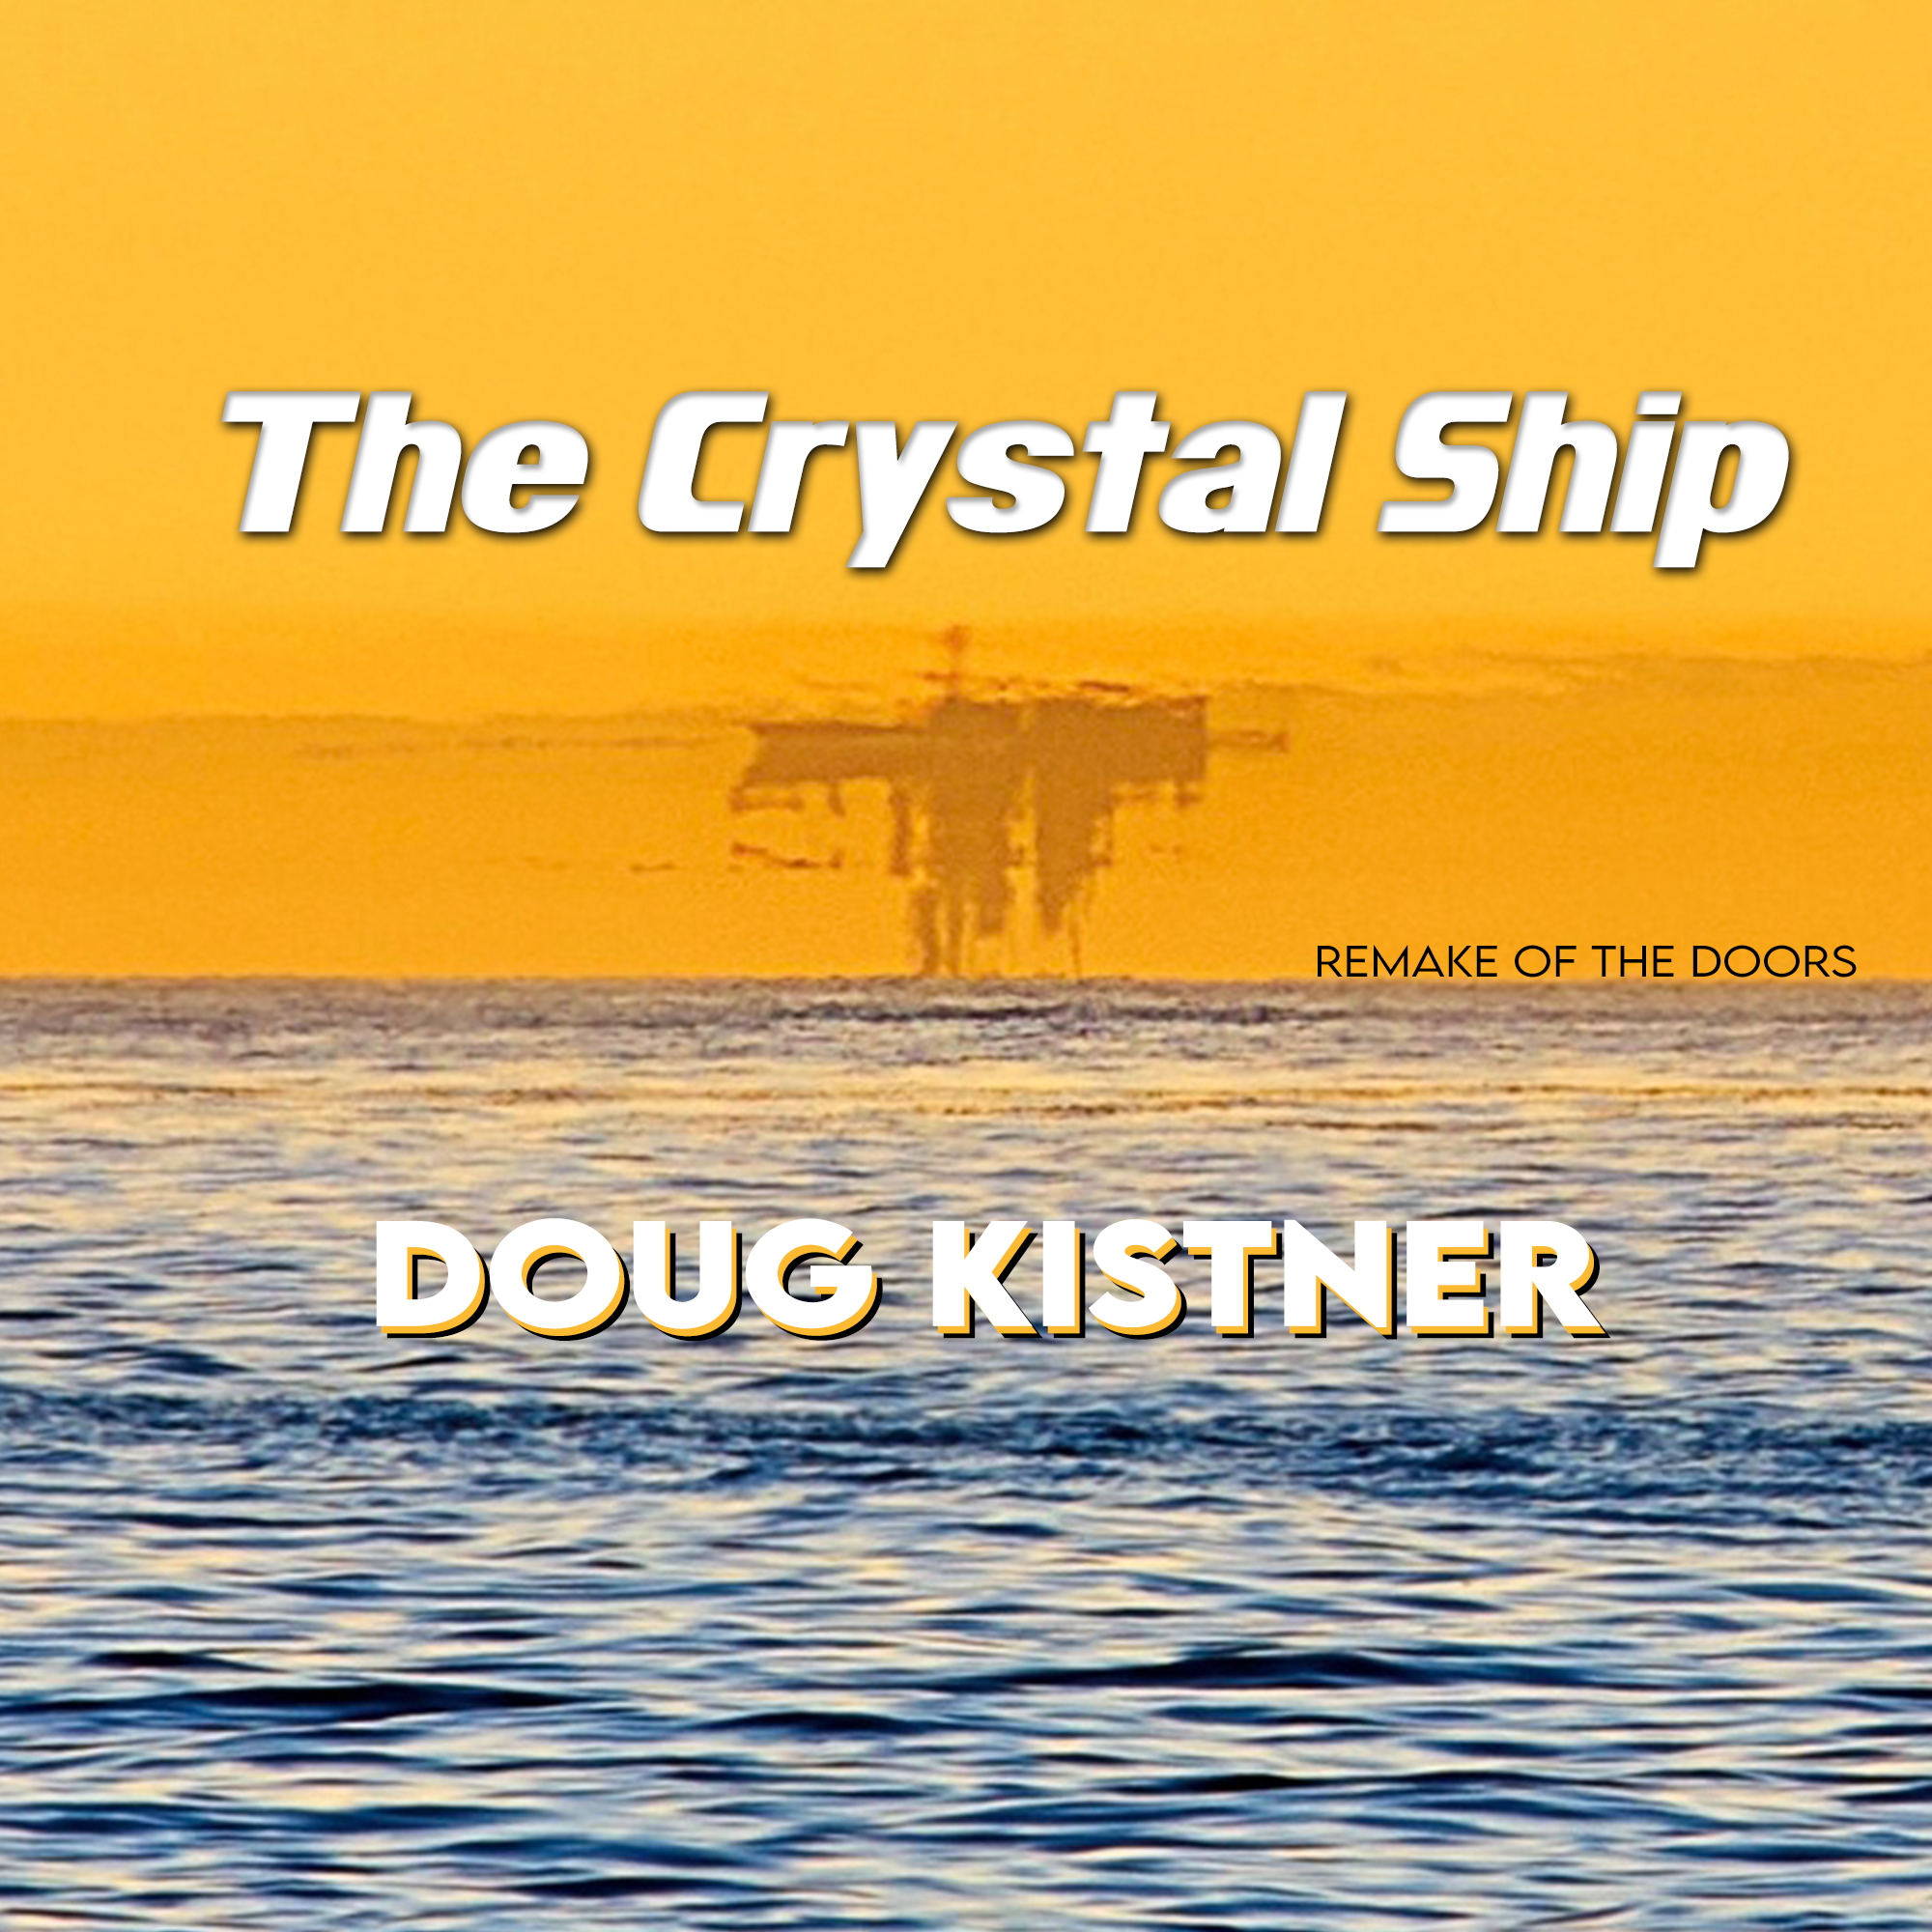 The Crystal Ship (The Doors cover)